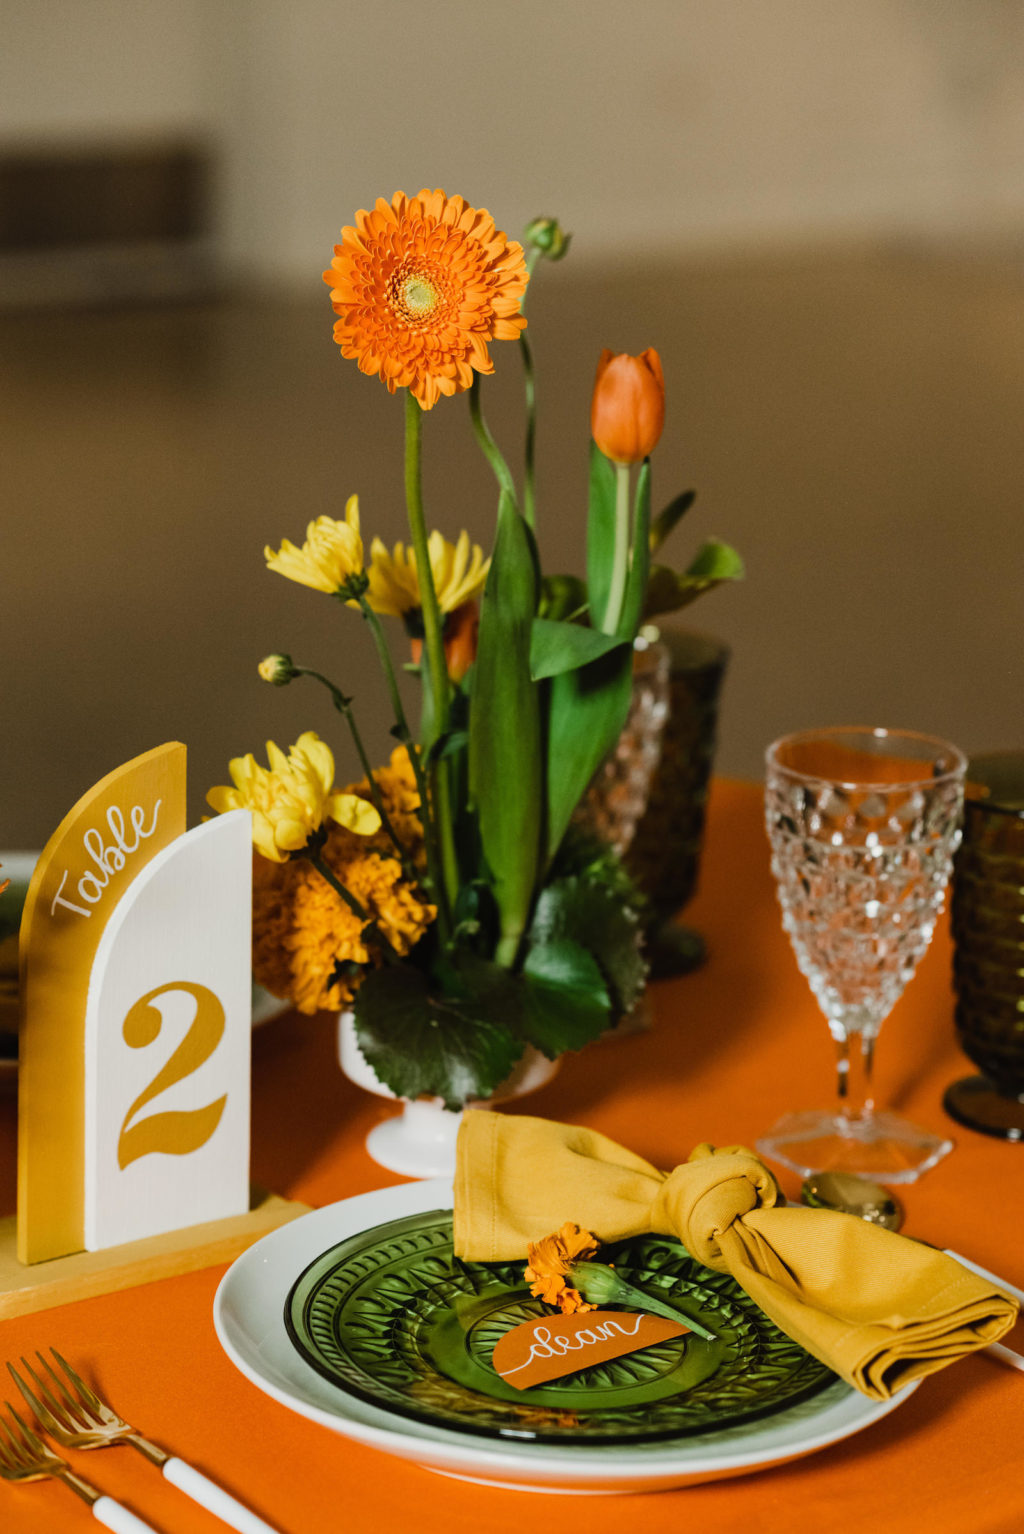 Retro Eclectic Wedding Reception Decor, Long Table with Orange Tablecloth, White Dinner Plate and Vintage Green Plate, Mustard Yellow Napkin, Geometric Yellow Table Number, Vibrant Floral Centerpieces, Yellow Flowers, Orange Marigolds, Green Anthuriums